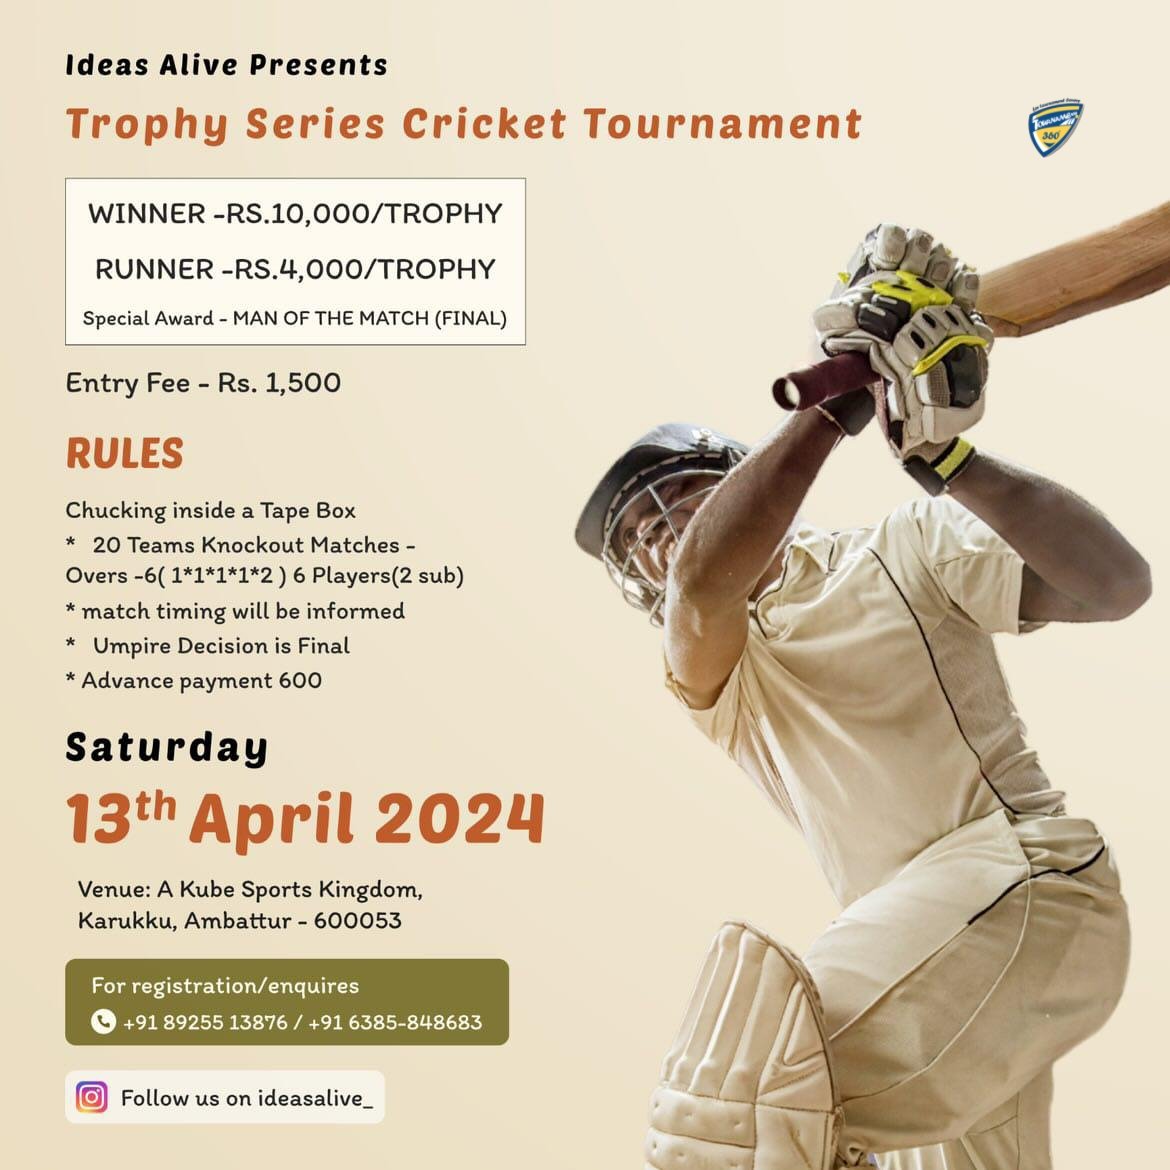 Ideasalive presents Trophy Series #Cricket #Tournament. The tournament to be held on 13th April 2024. Held at A Kube Sports Kingdom Ambattur, #Chennai. @tournaments_360 @CricHeroes @Cricketinindia